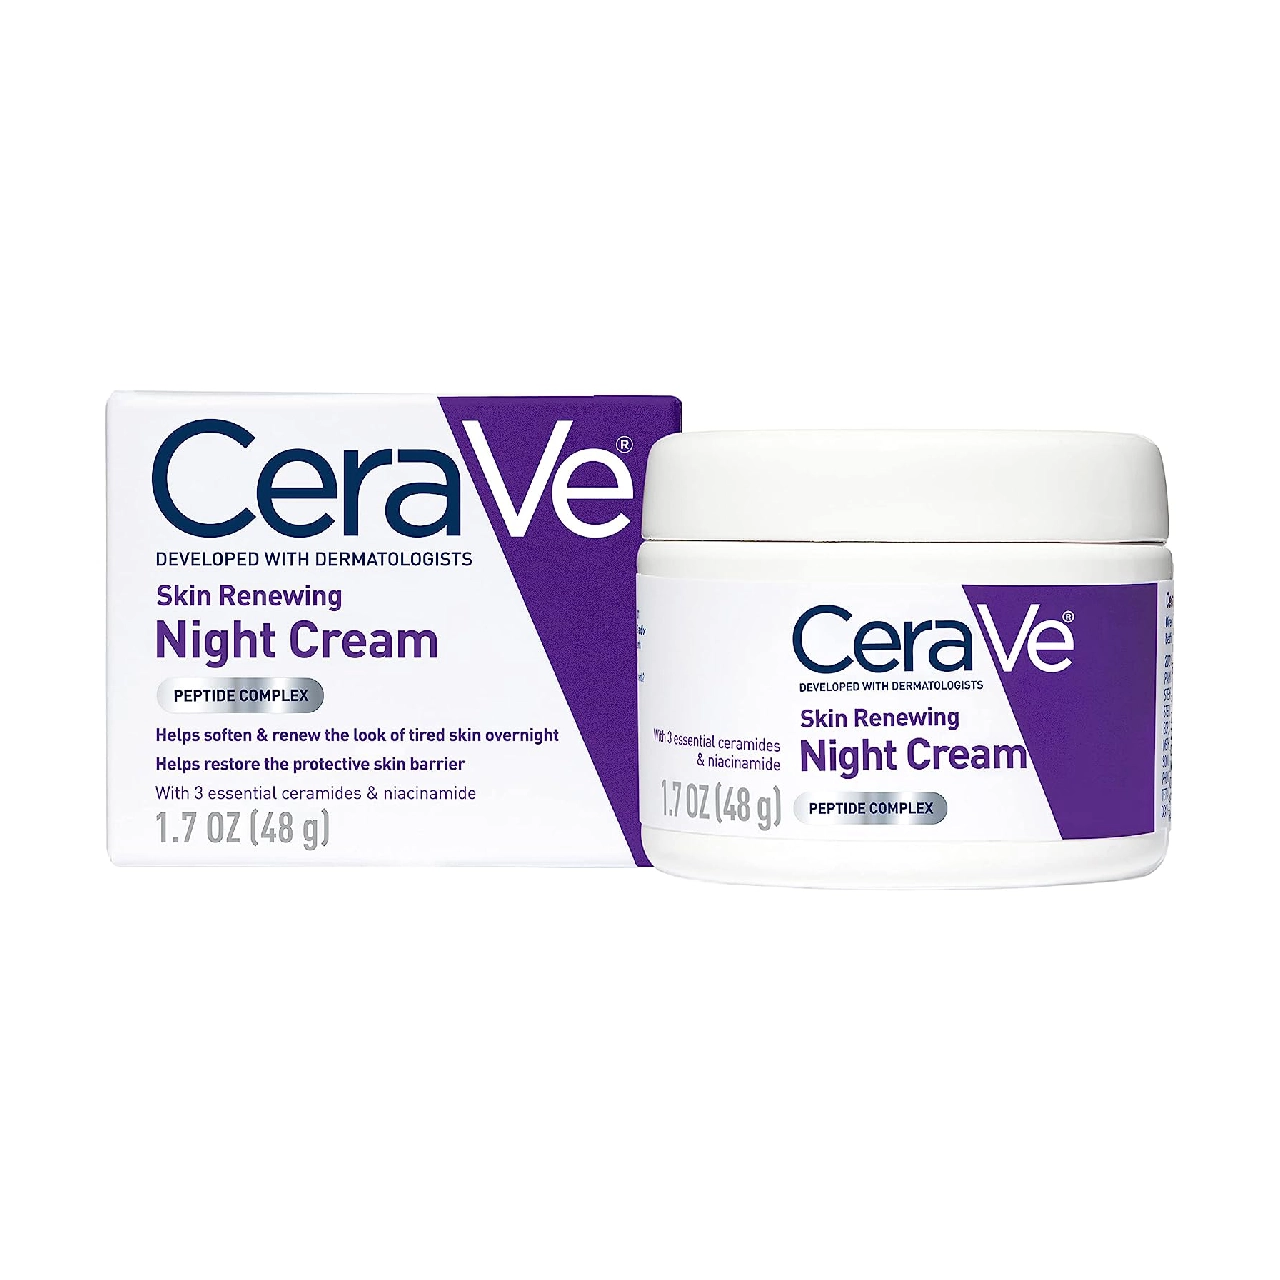 CeraVe Skin Renewing Night Cream container on a white background